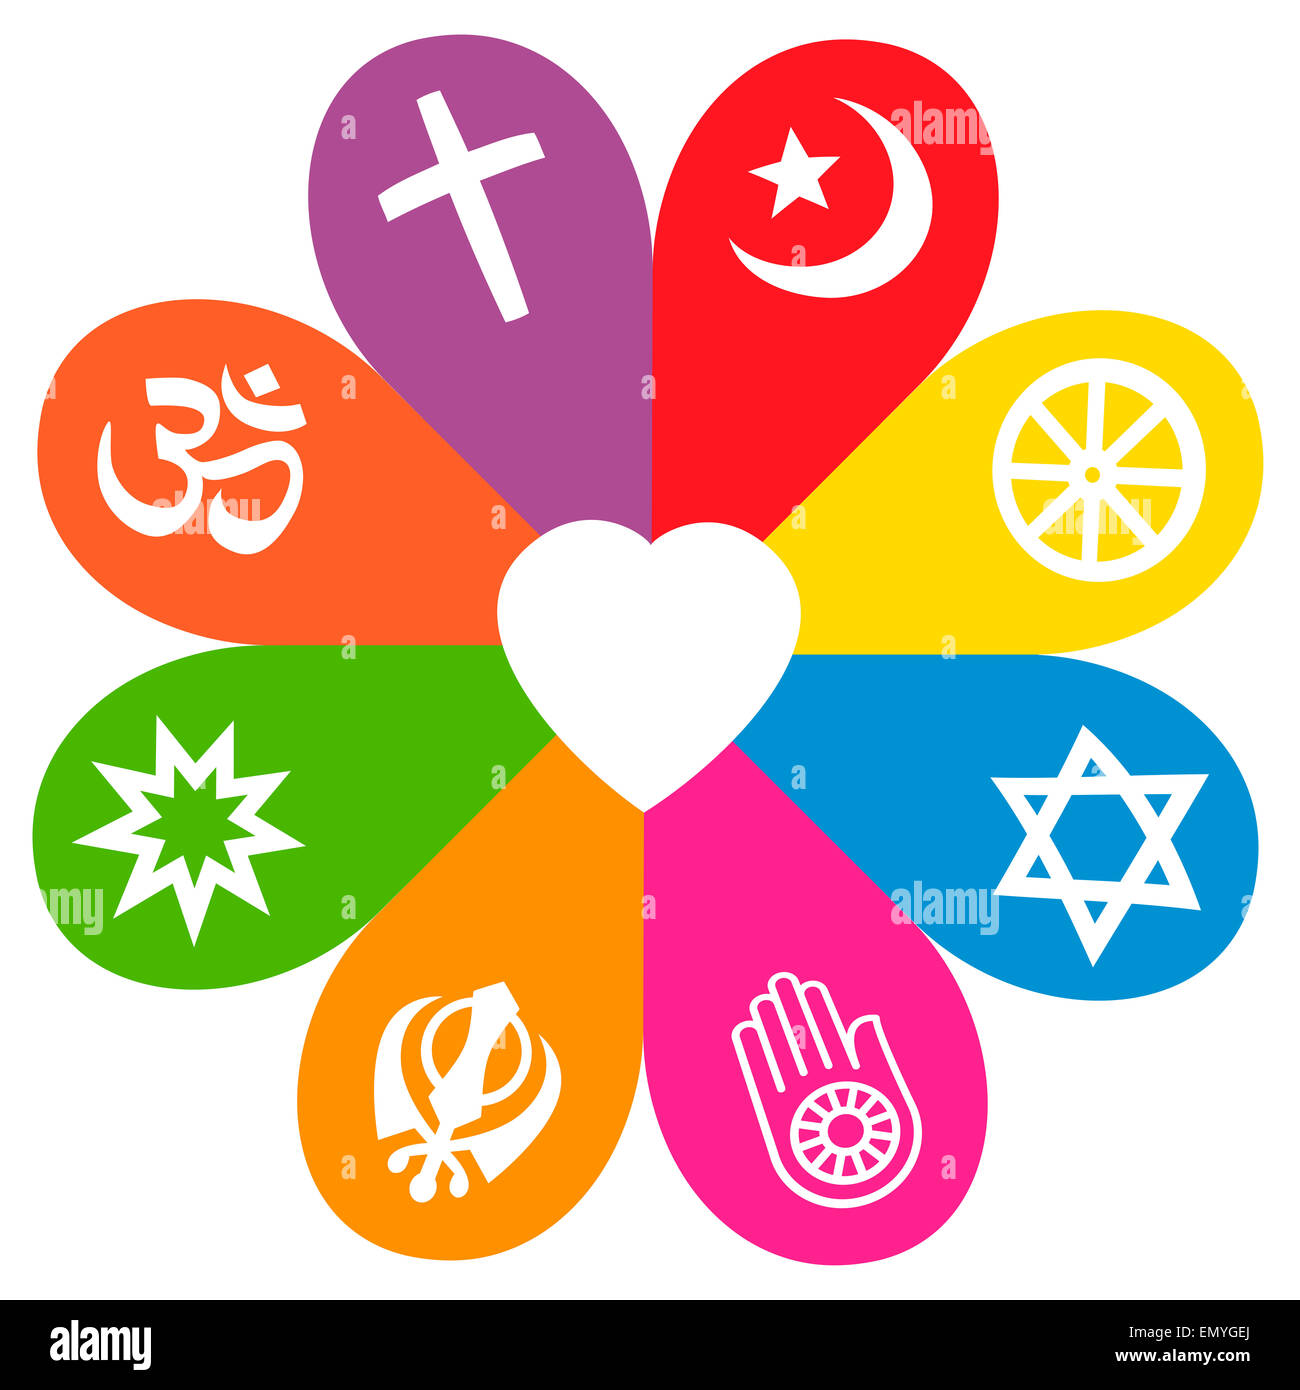 Religious signs on colored petals assembling around a heart as a symbol for colorful religious individuality or faith. Stock Photo